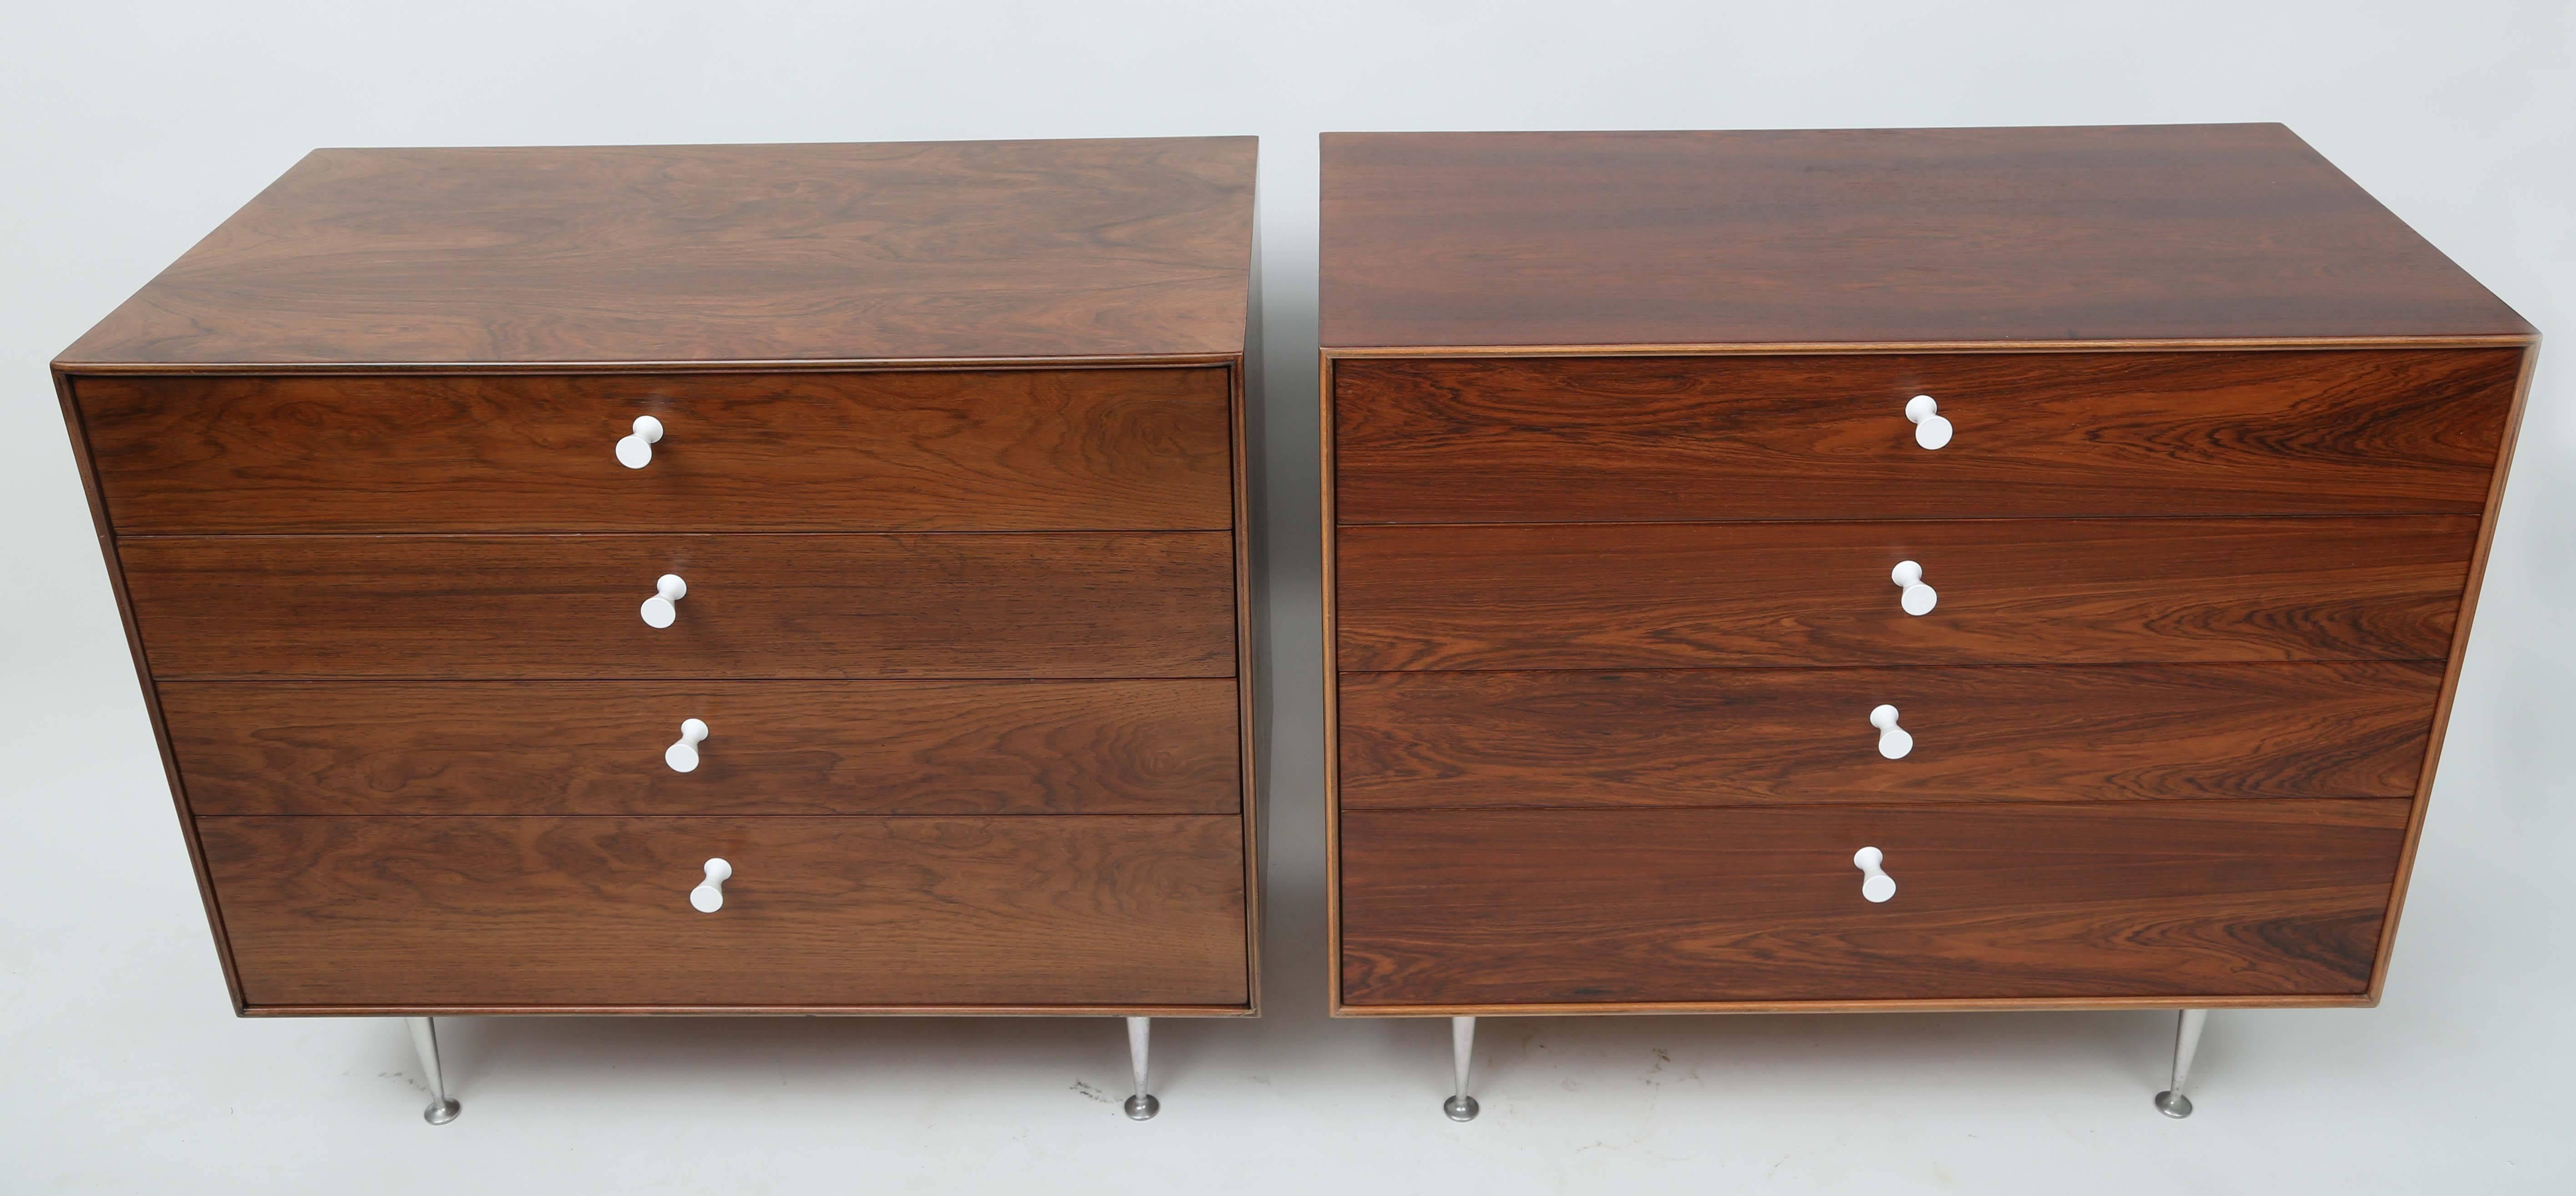 Thin edge dressers by George Nelson for Herman Miller
Porcelain handles and metal legs.
Dressers have been refinished.
 